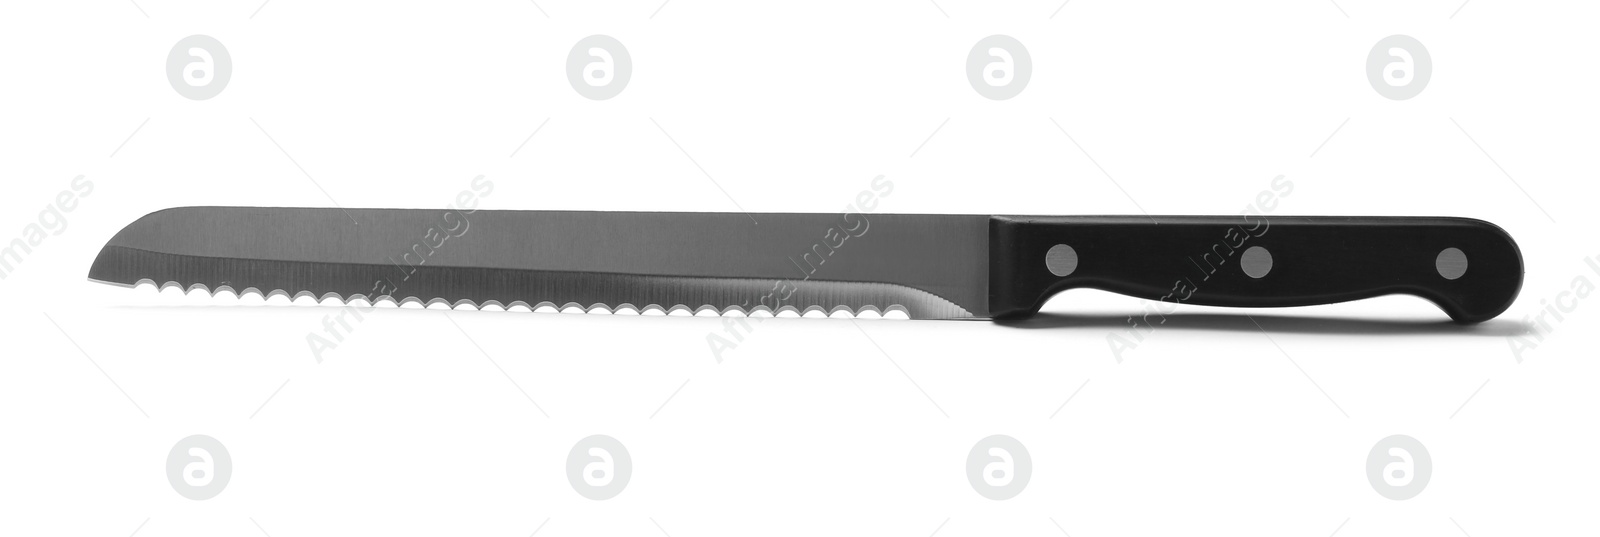 Photo of Stainless steel bread knife with plastic handle isolated on white